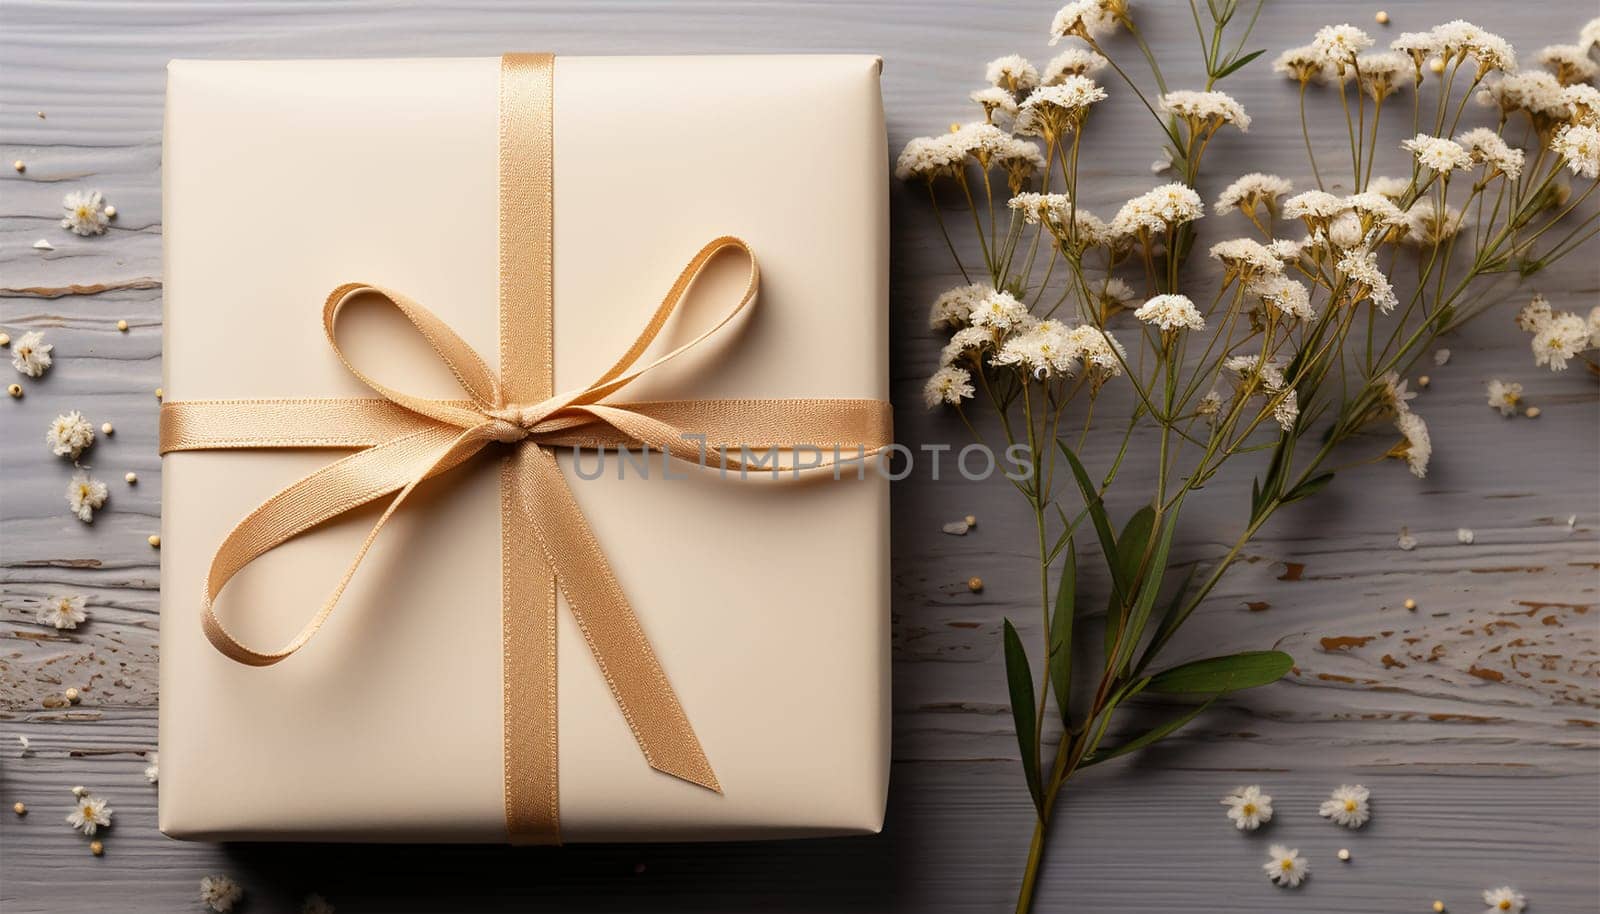 Handmade gift in craft paper box close up with lavender,romantic flowers. Shipping eco package with flowers. MINIMALISTIC Delivery pack. Gift idea, eco-lifestyle. Natural concept. Sustainable gift package. Romantic design Valentine's Day,Mother's Day concept by Annebel146